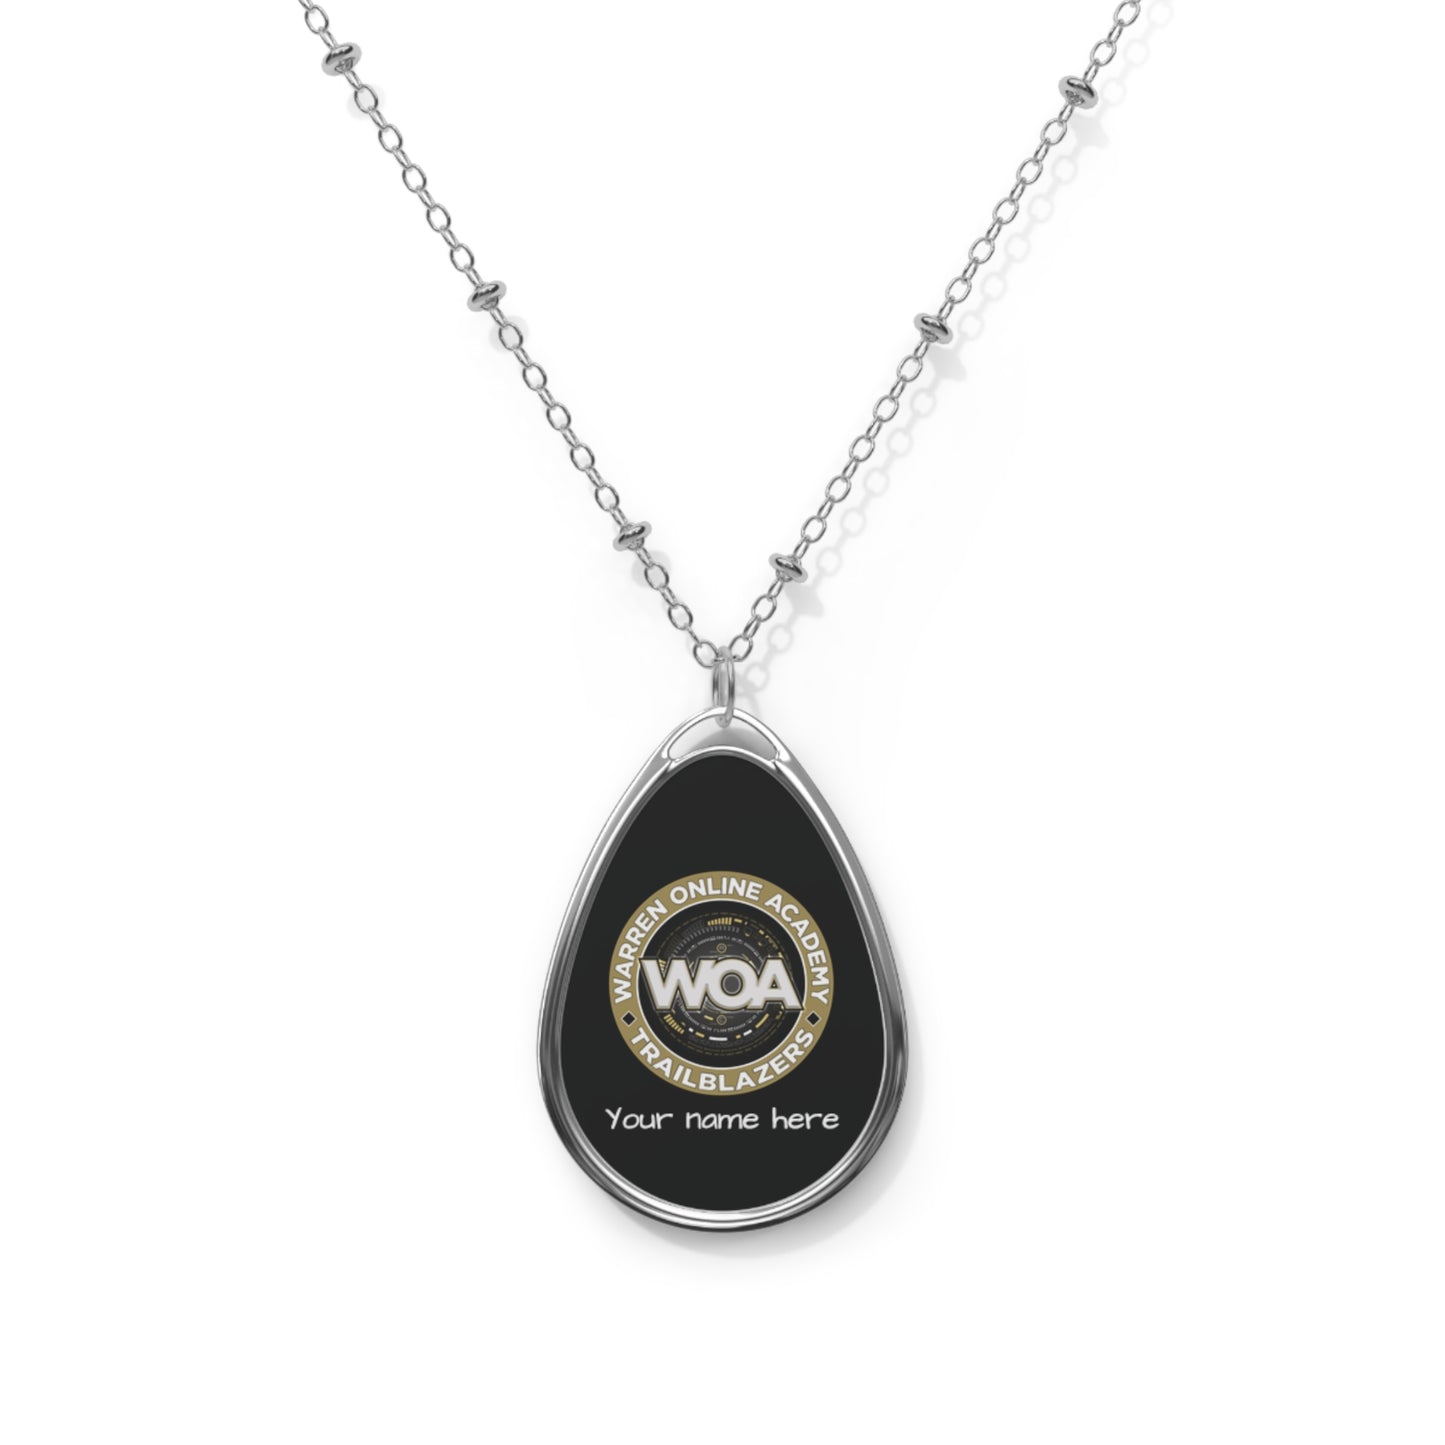 WOA Personalized Oval Necklace | FREE SHIPPING!